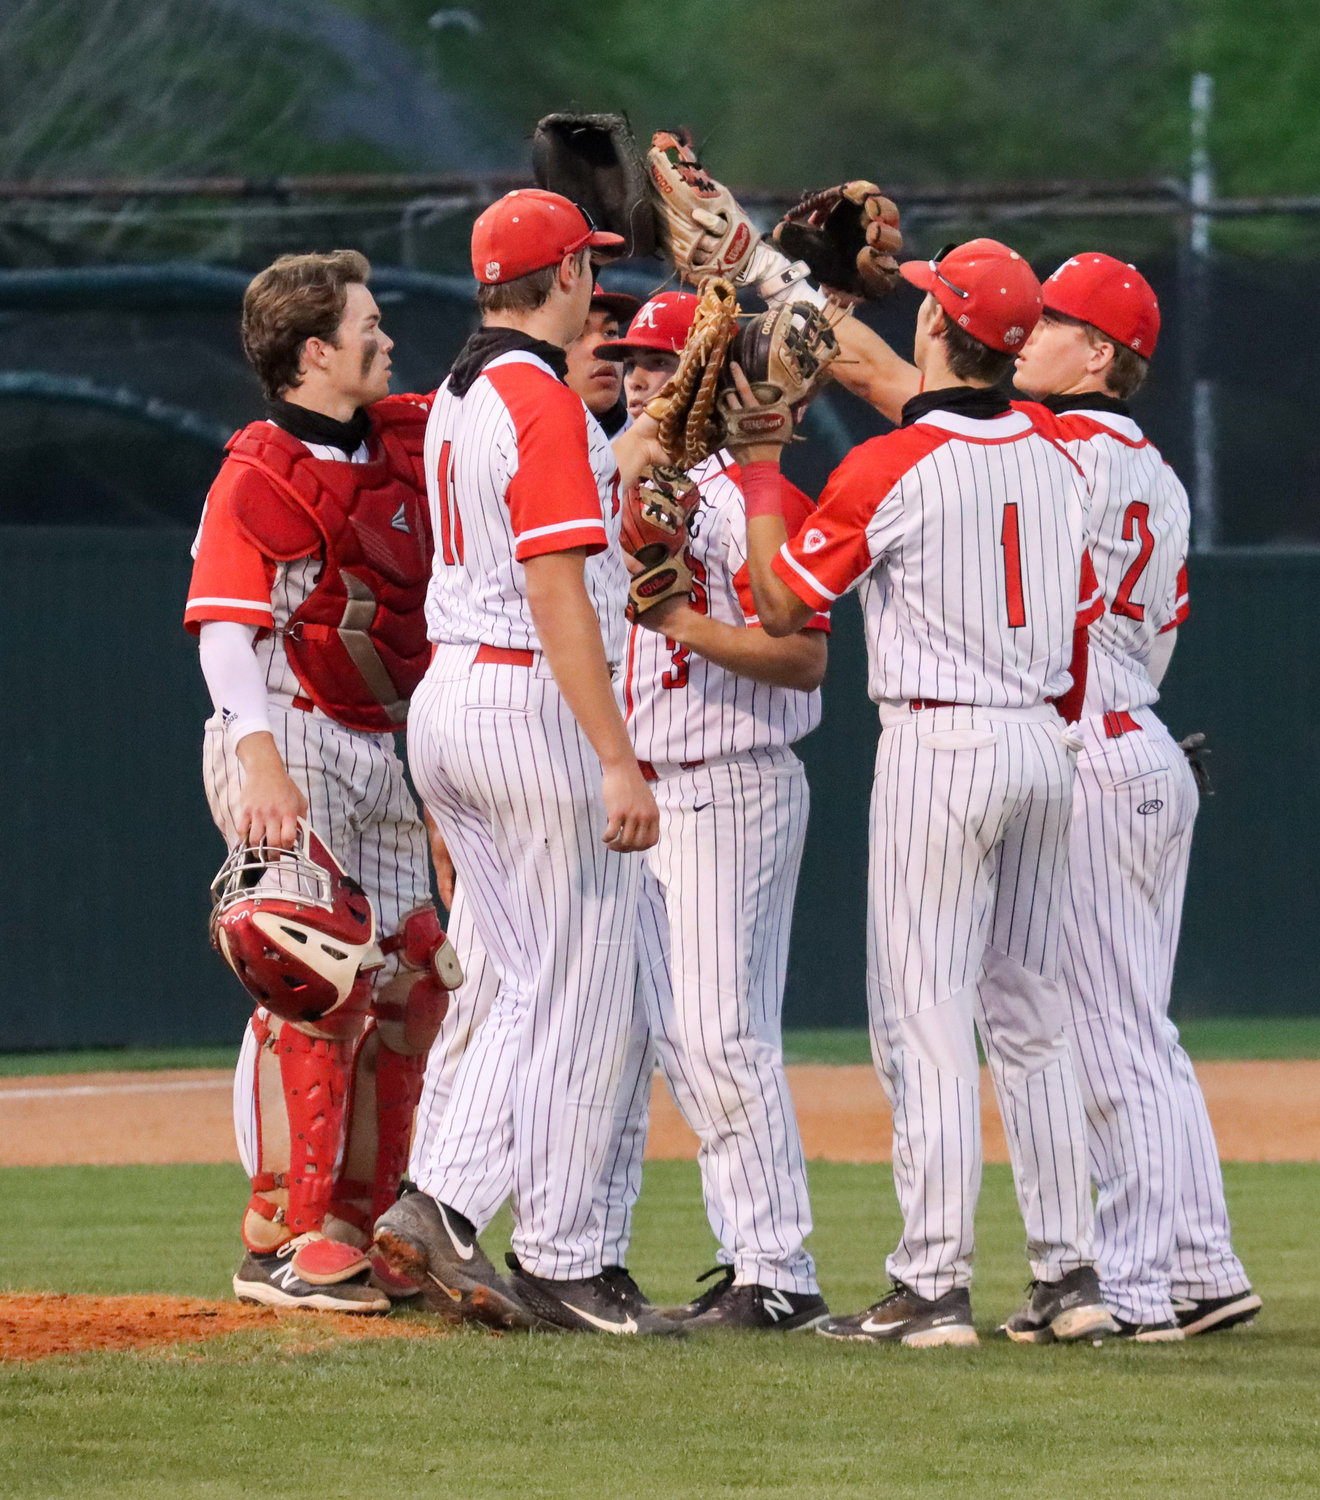 Katy players talk during a break in play during a game against Tompkins on Tuesday, March 30, at Katy High.